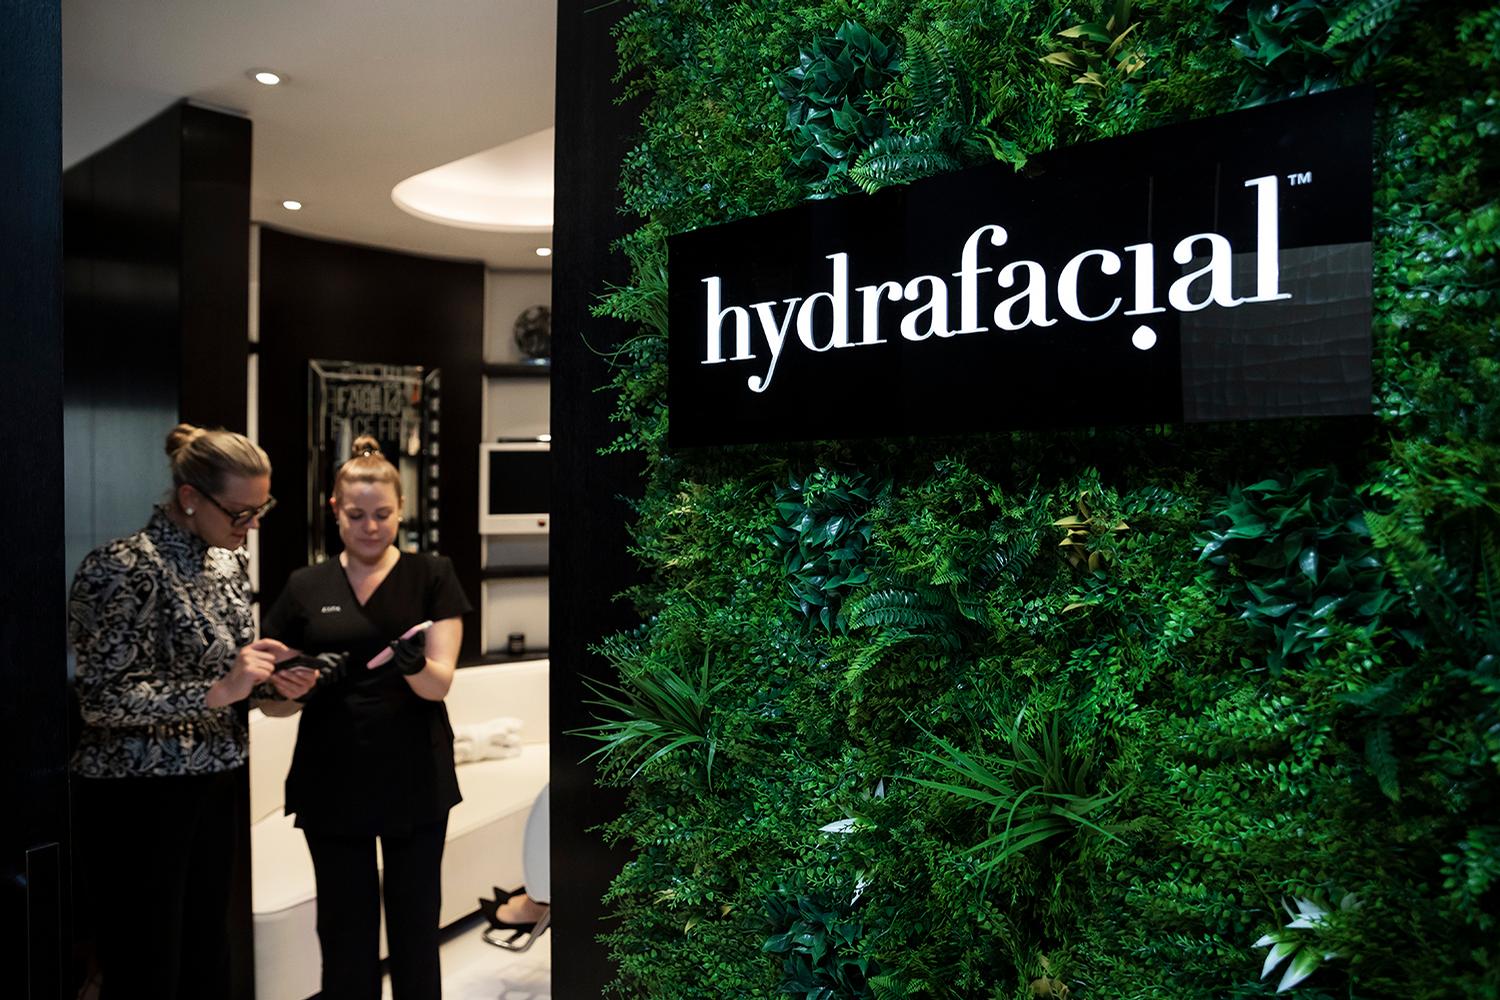 Spa guests can purchase single treatments or programmes including up to 12 HydraFacial treatments to achieve long-term skin health goals